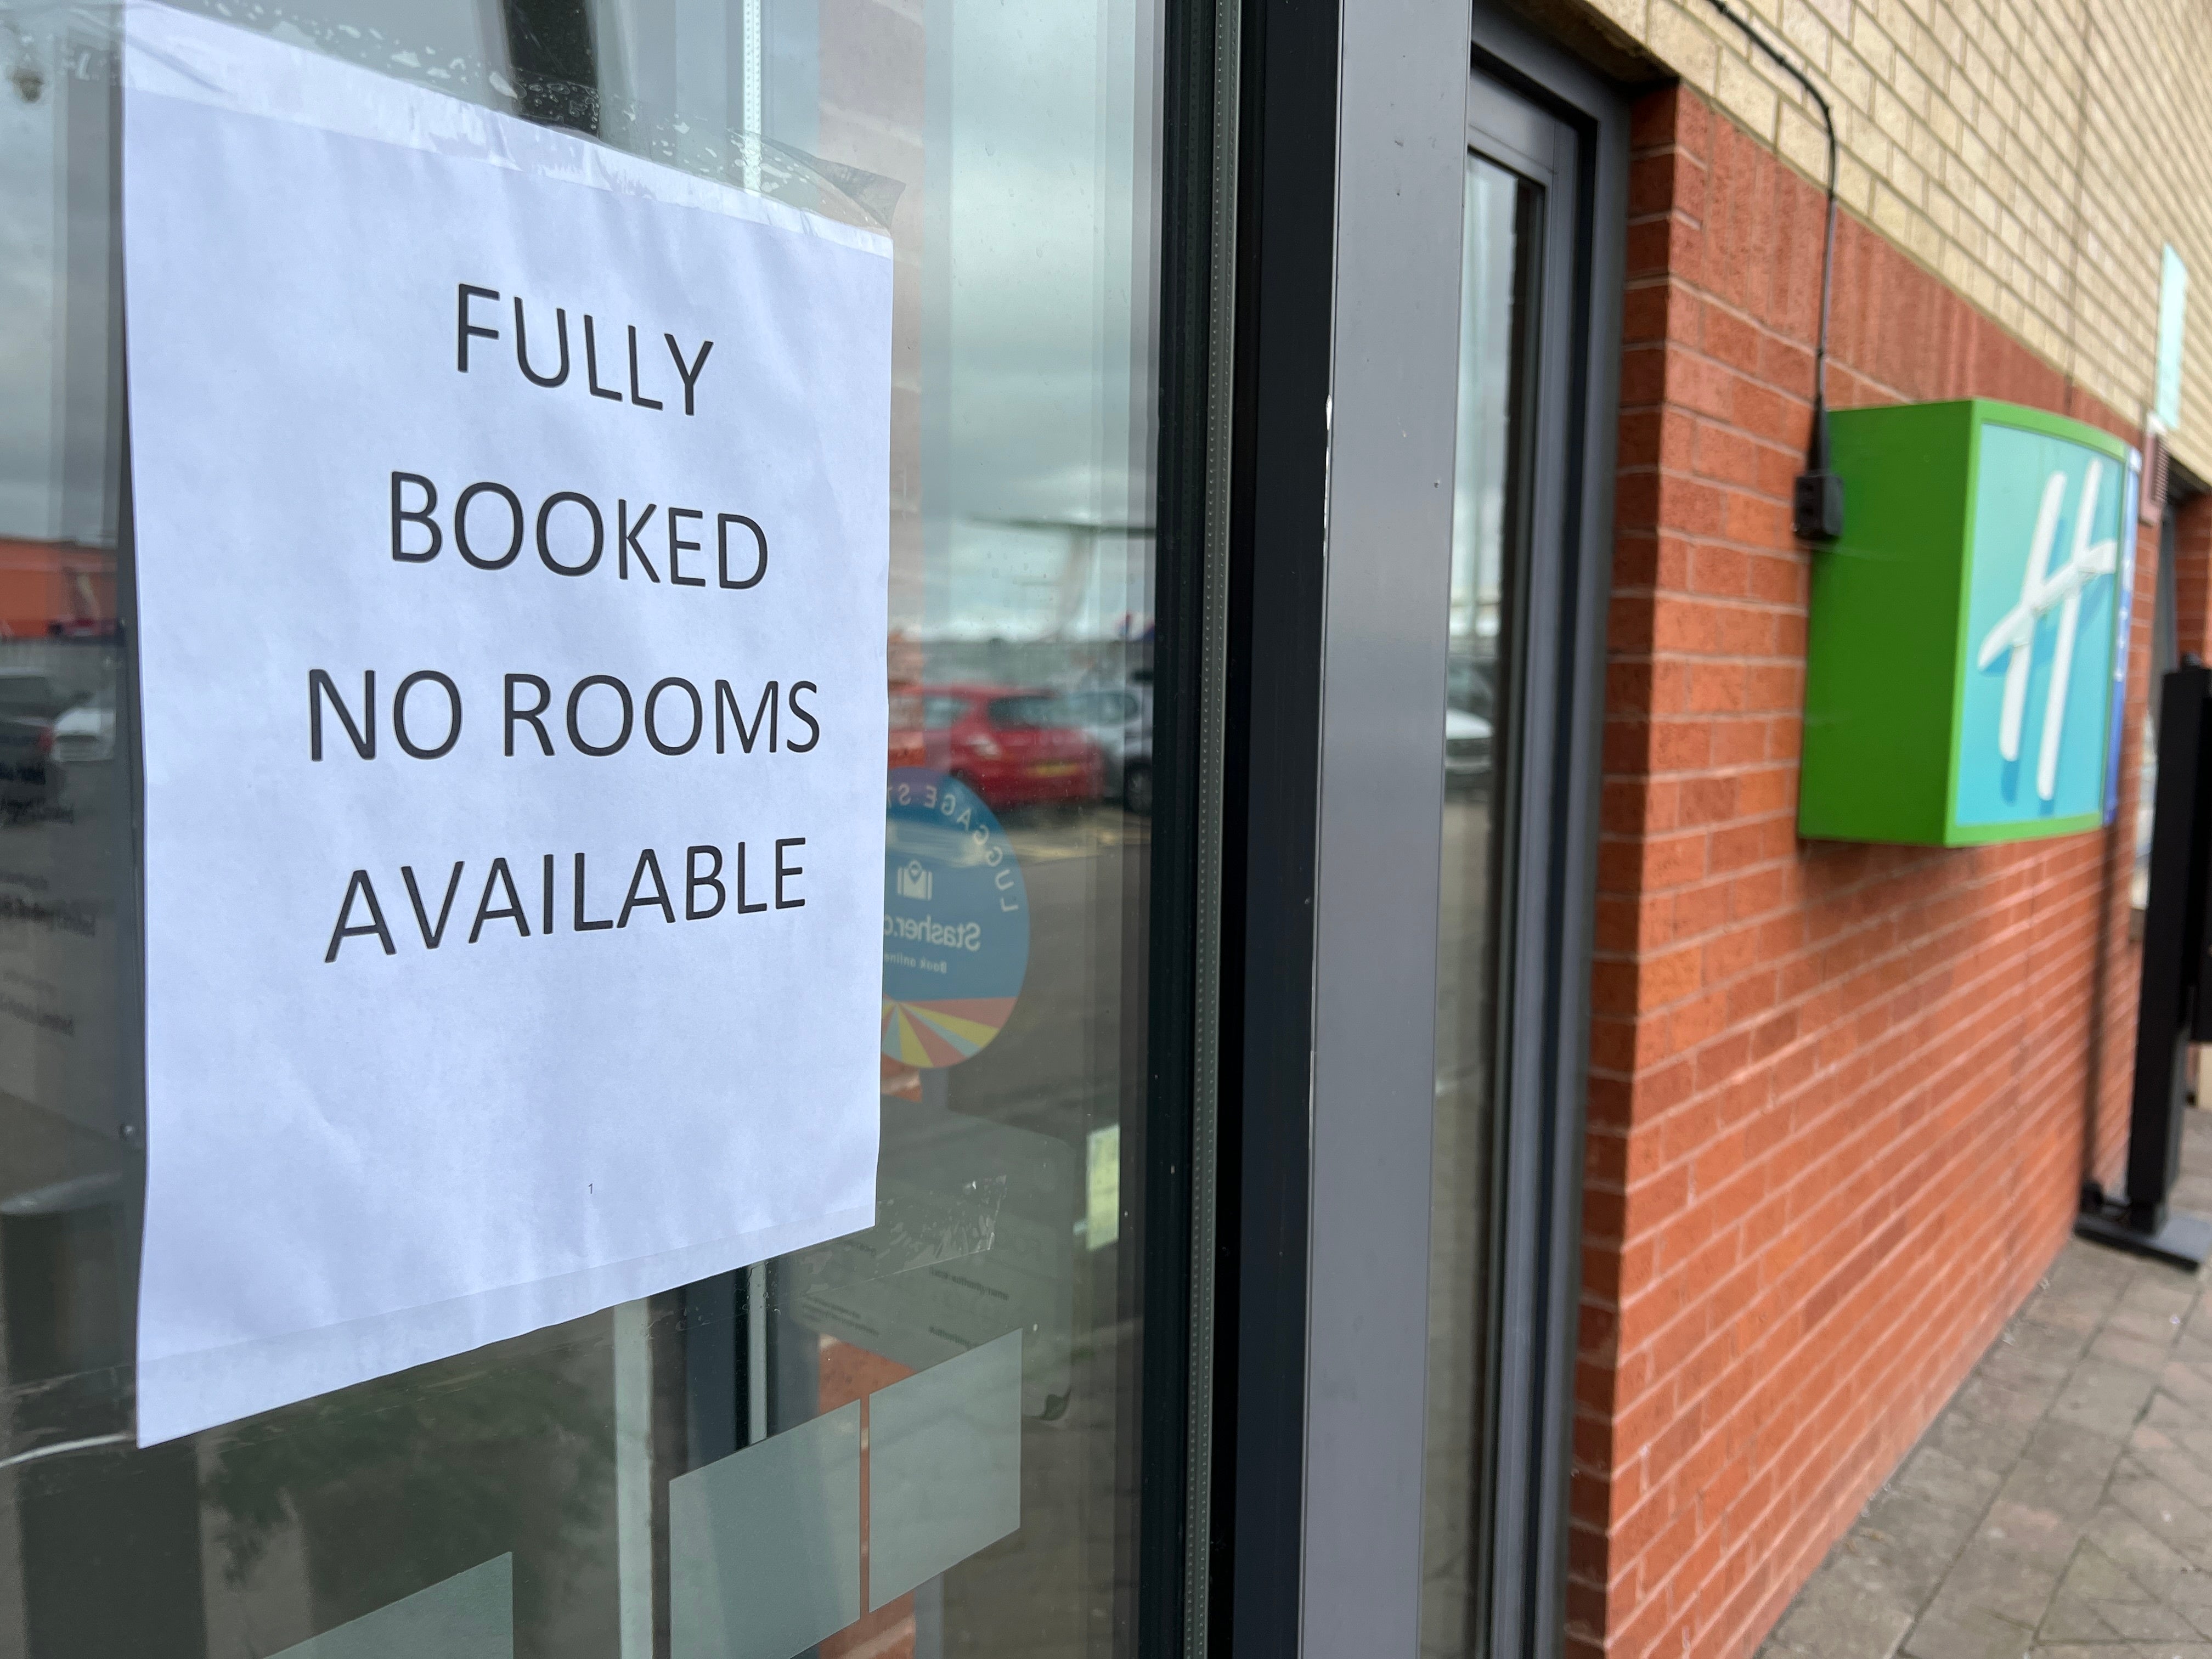 No room at the (Holiday) Inn – or any other hotels in the Luton area